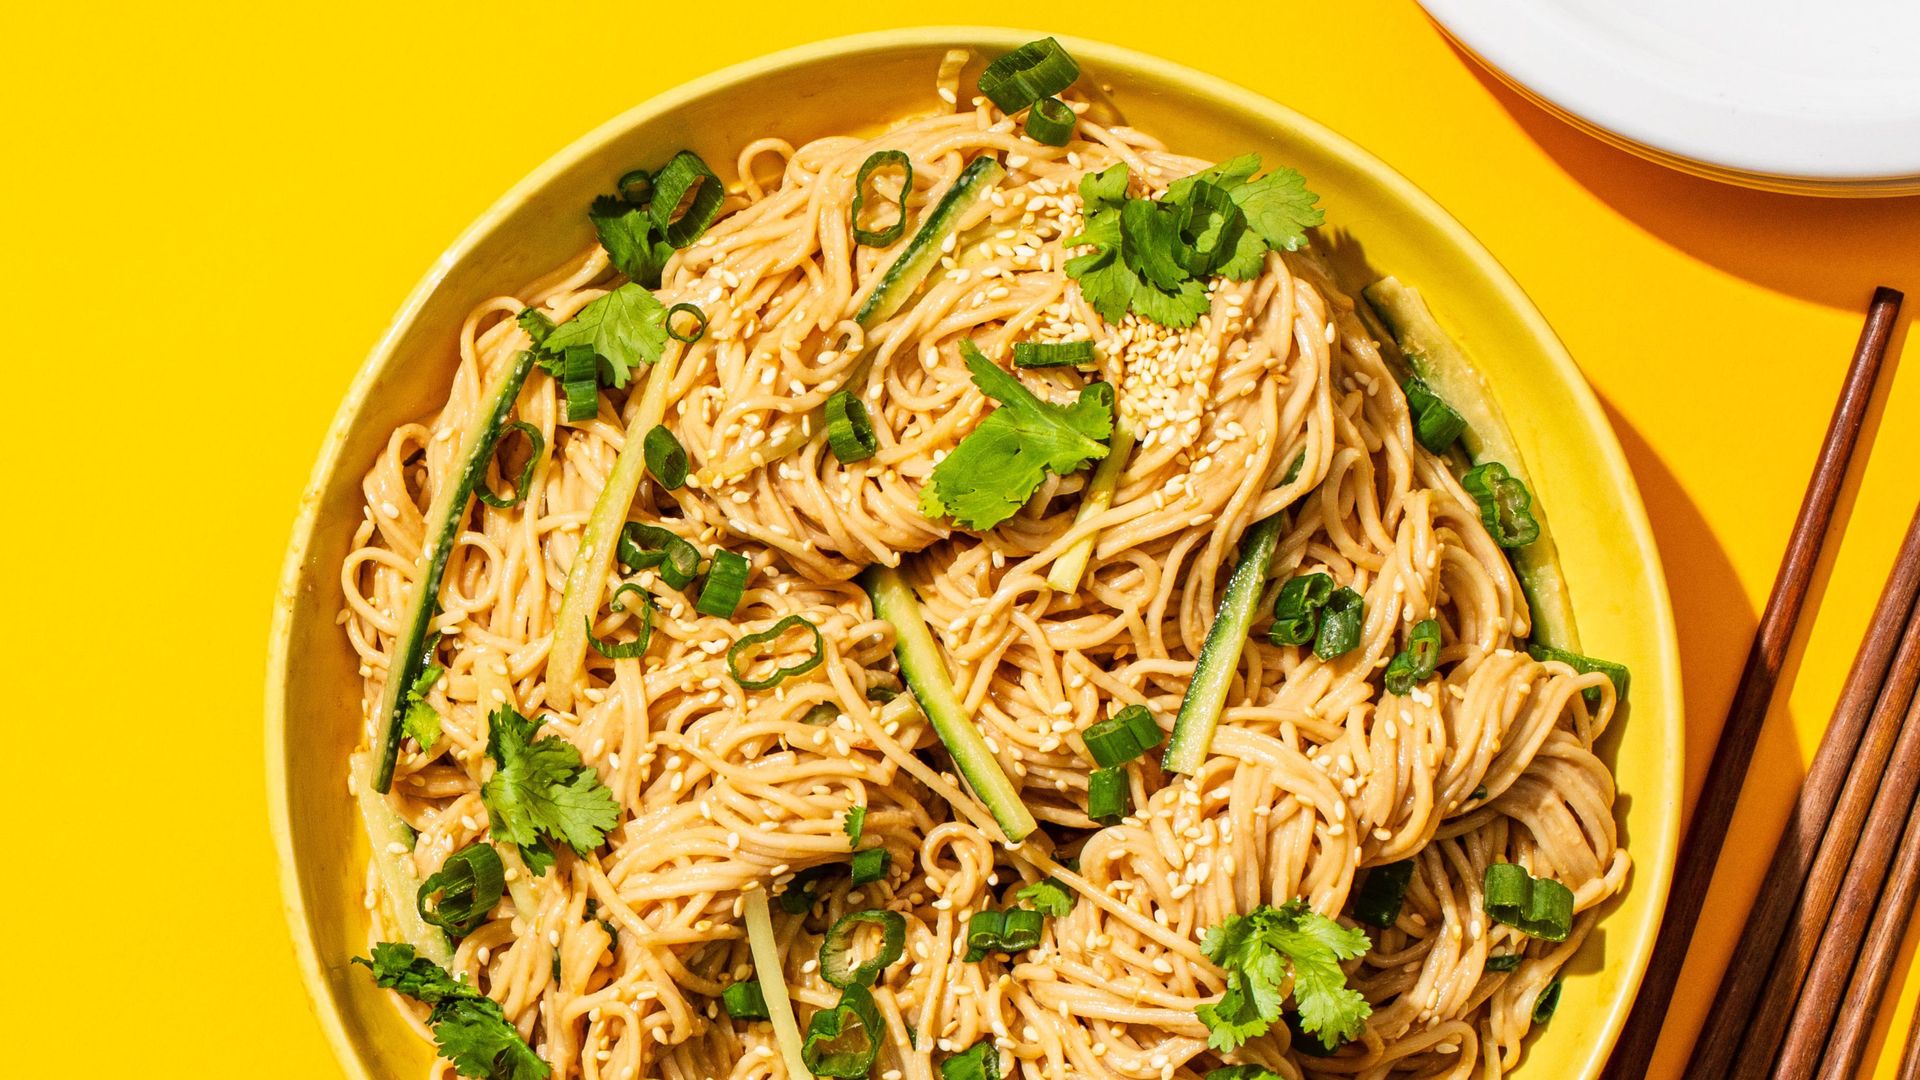 An aerial shot of a yellow bowl of sesame noodles, with cilantro leaves scattered on top, sitting on a yellow table.